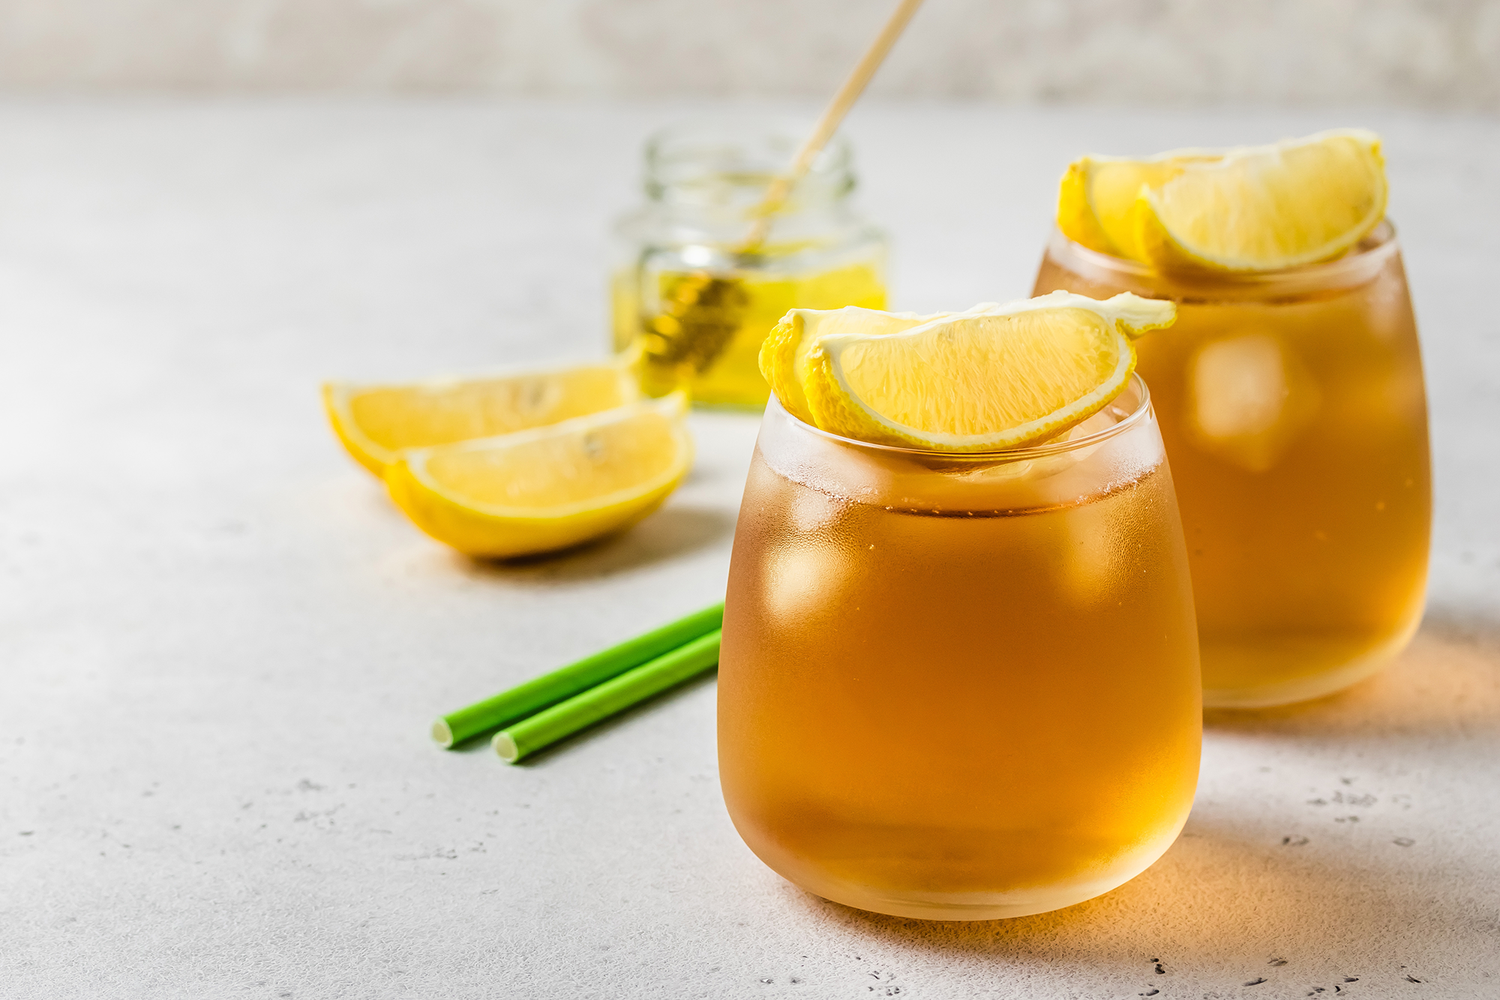 How to Make a Juicy, Fruity Iced Tea With Minimal Effort